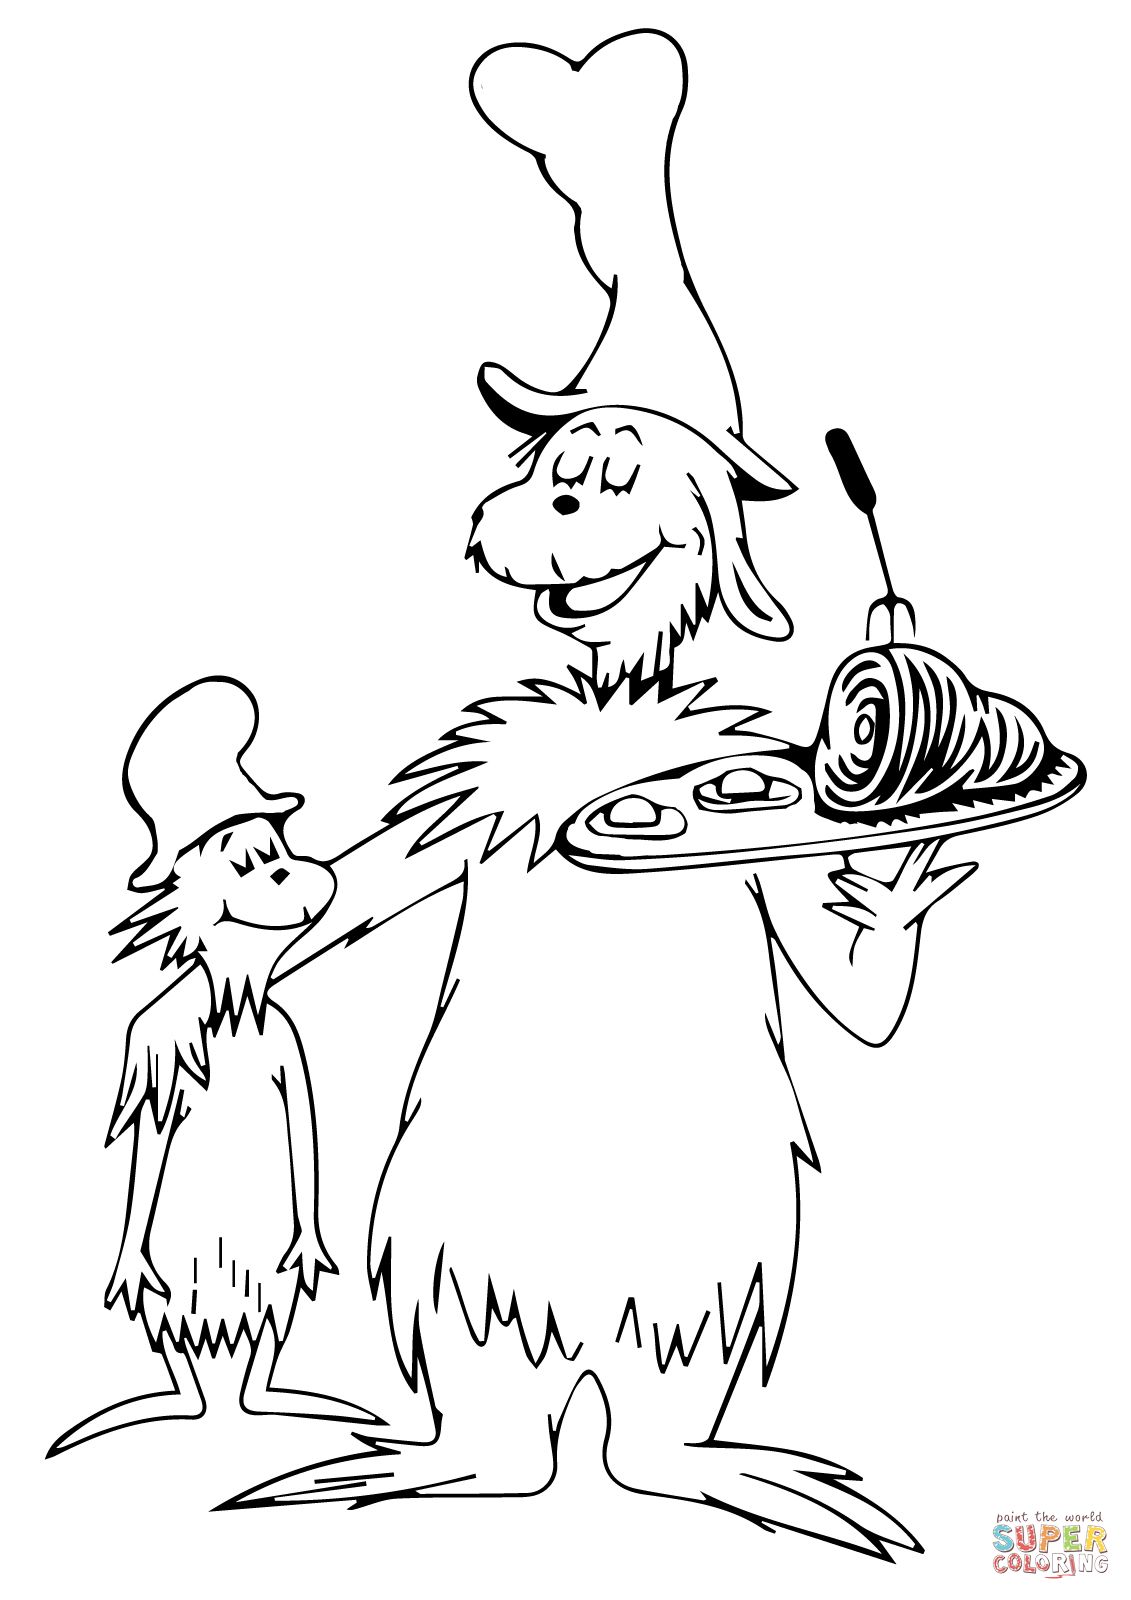 green-eggs-and-ham-coloring-pages-4.jpg